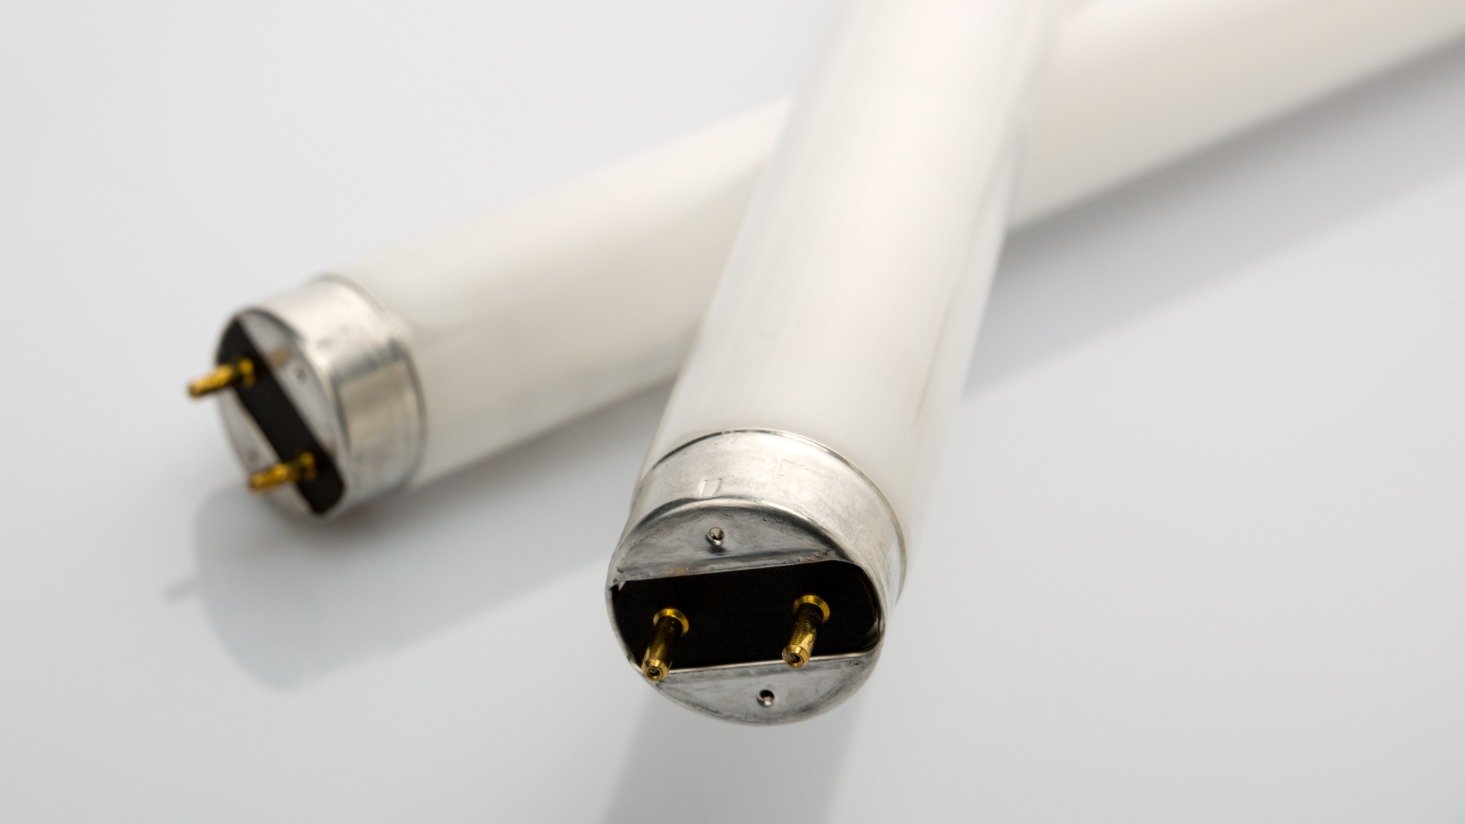 What should I do if I have 8-foot fluorescent lamps?